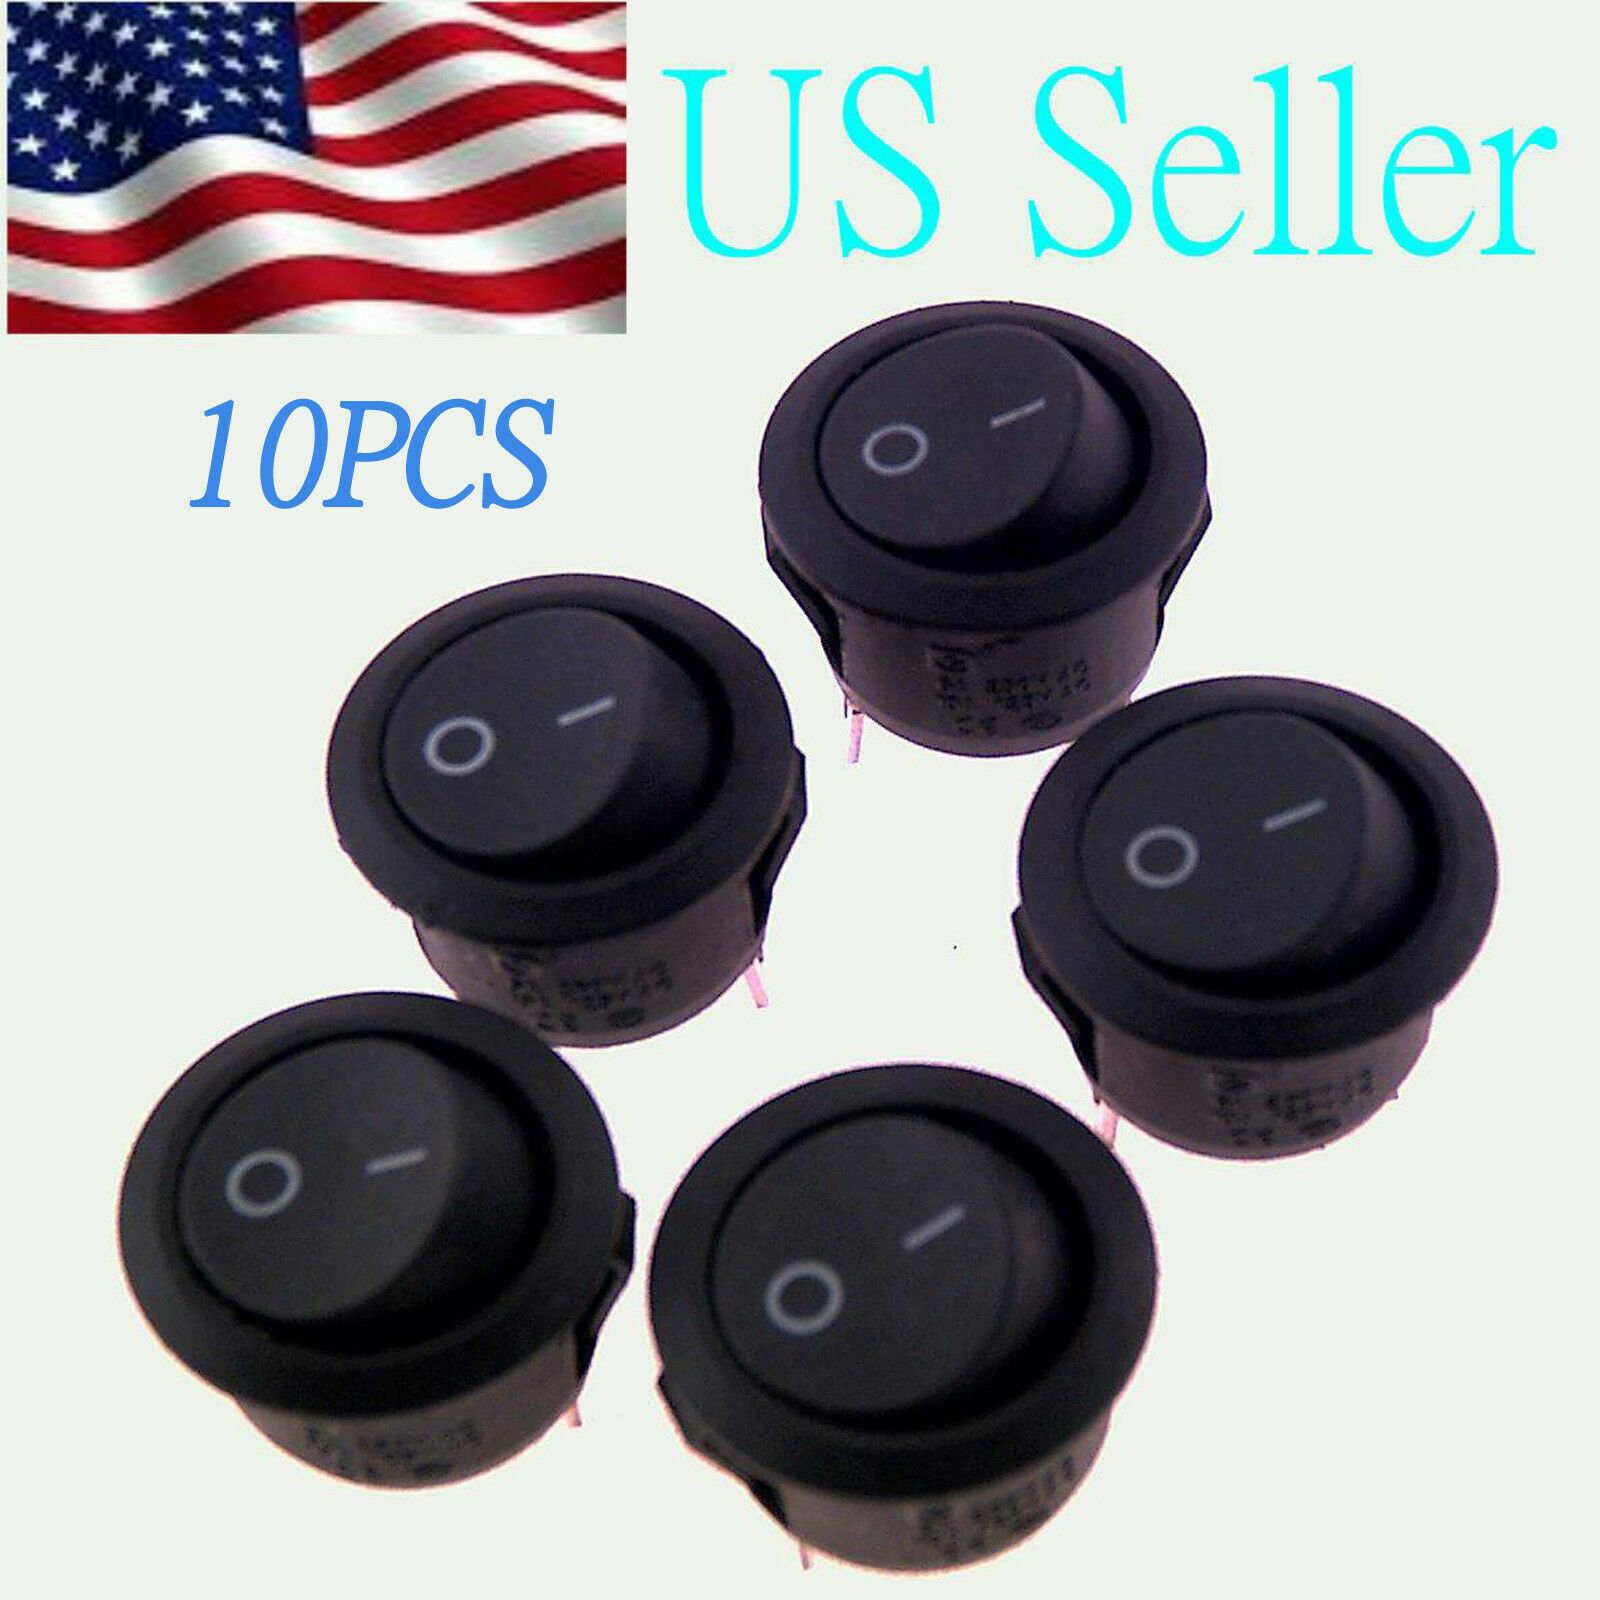 10X ROCKER SWITCHES 12V ROUND TOGGLE ON OFF 12 VOLT CAR SNAP IN SWITCH